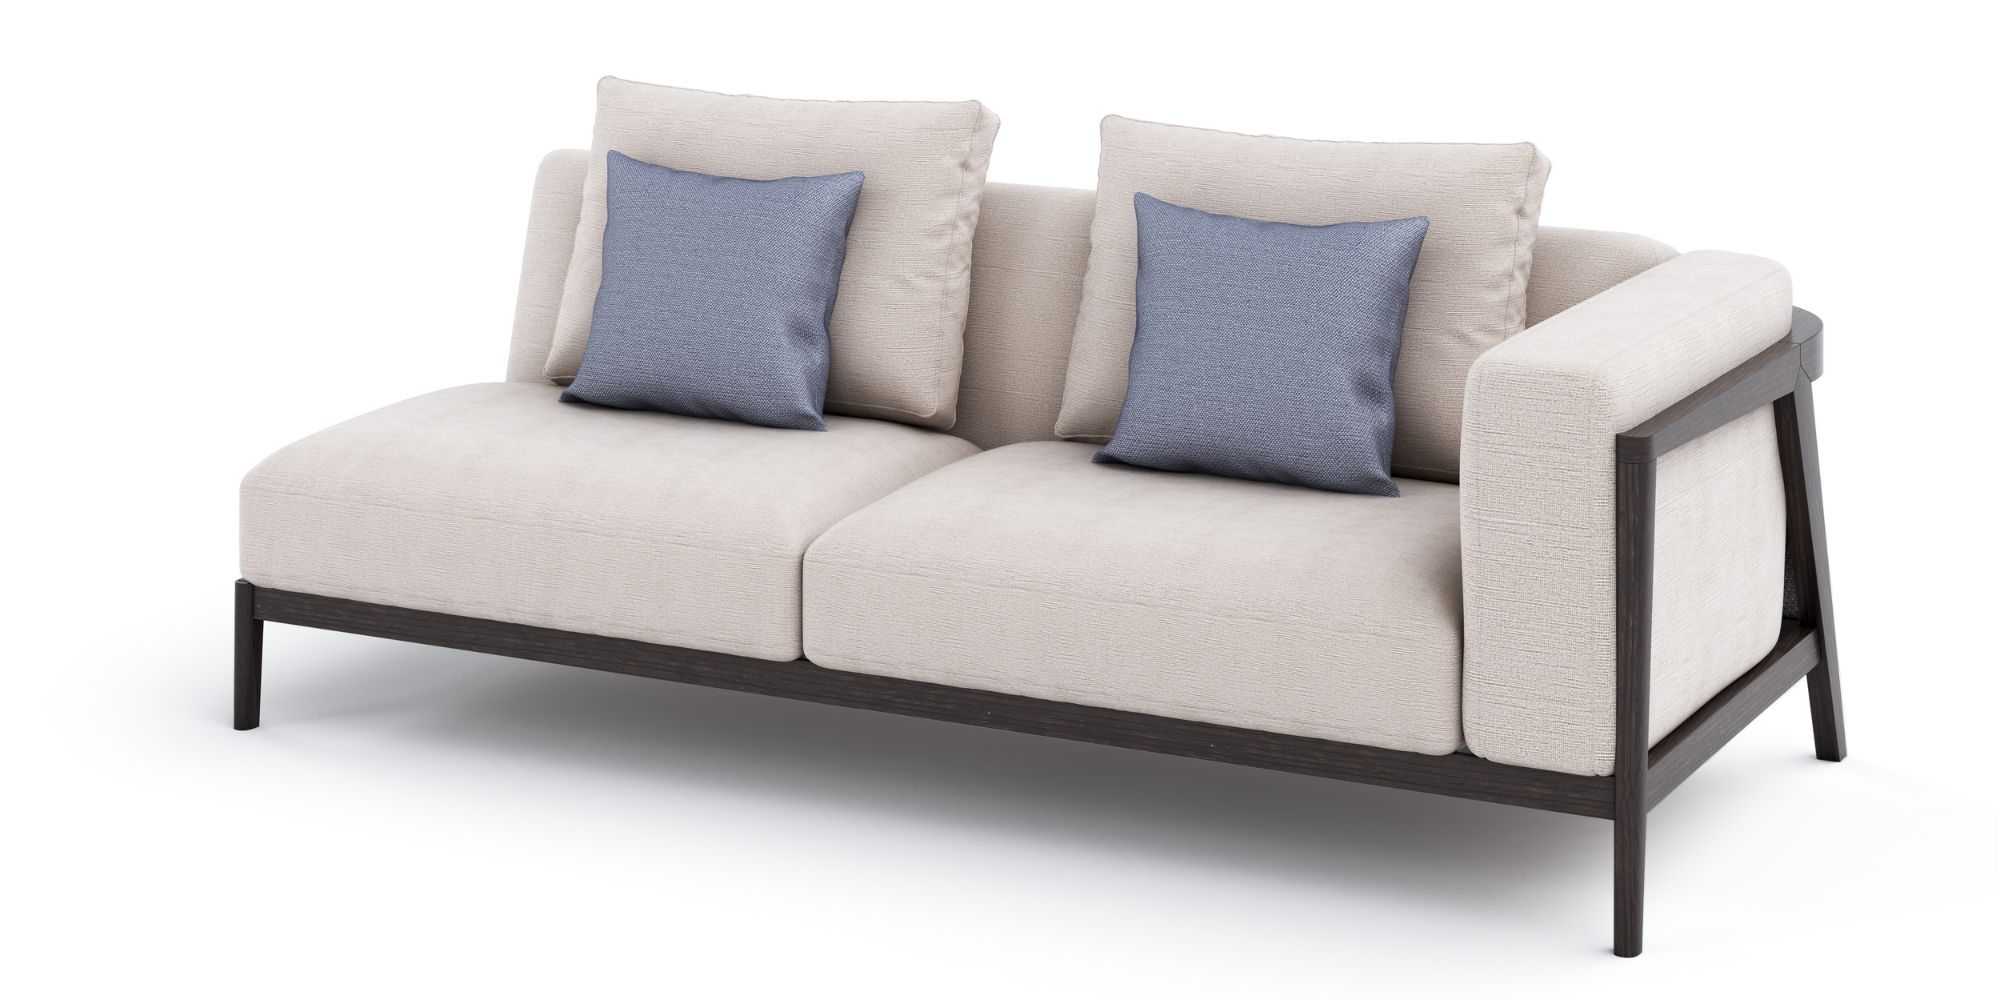 Porto Bench 2 seater in Outdoor Sofas for Porto collection